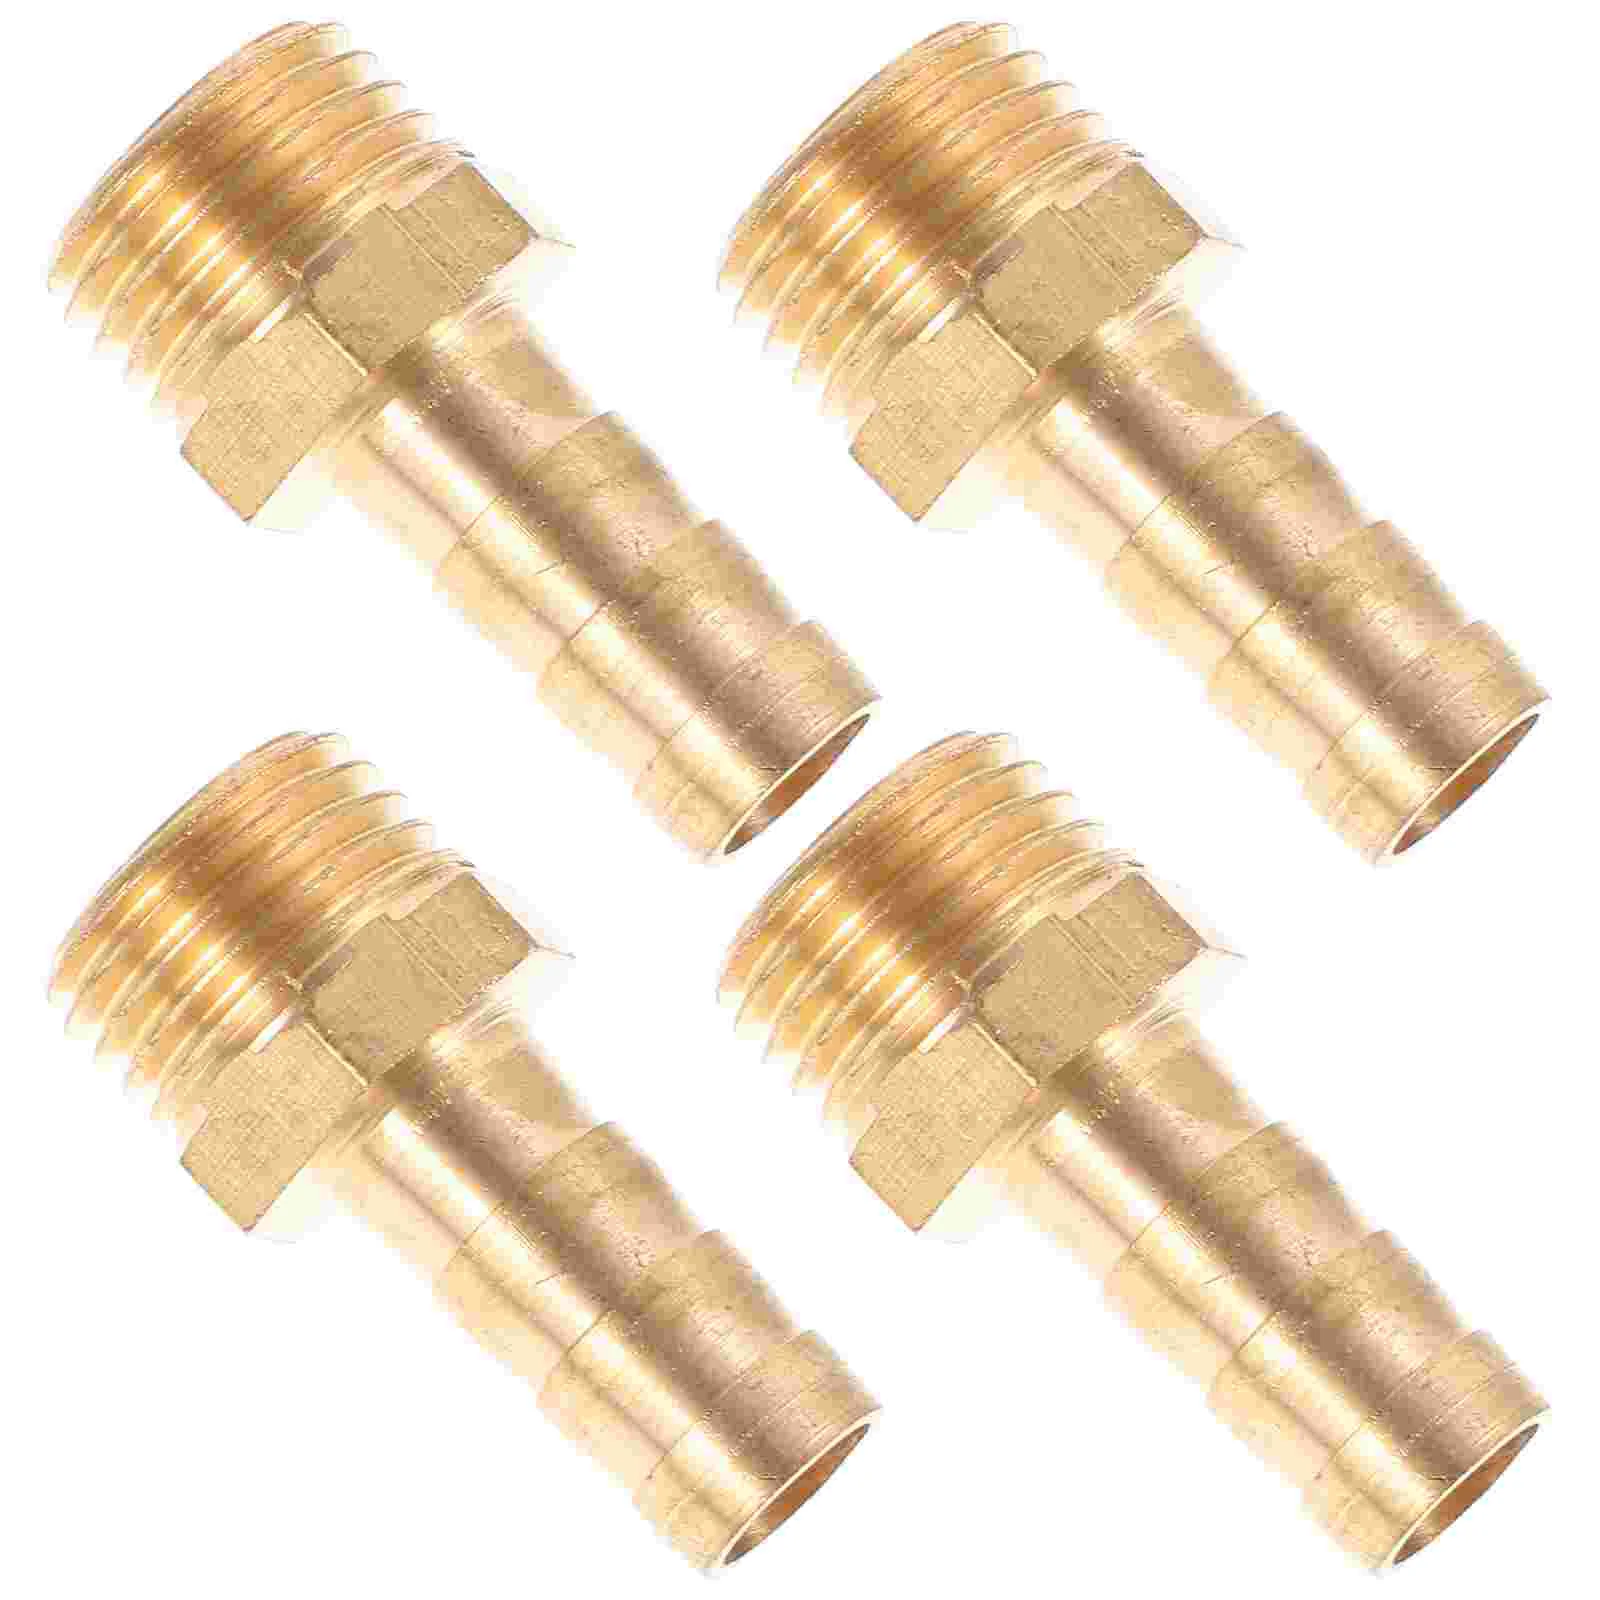 

4 Pcs Brass Hose Barb Tee 1/4" X 1/4"x T-Connector 3-Way Air 5-Pack Pex Connectors Adapter Accessories Fittings Pipe Copper Rv